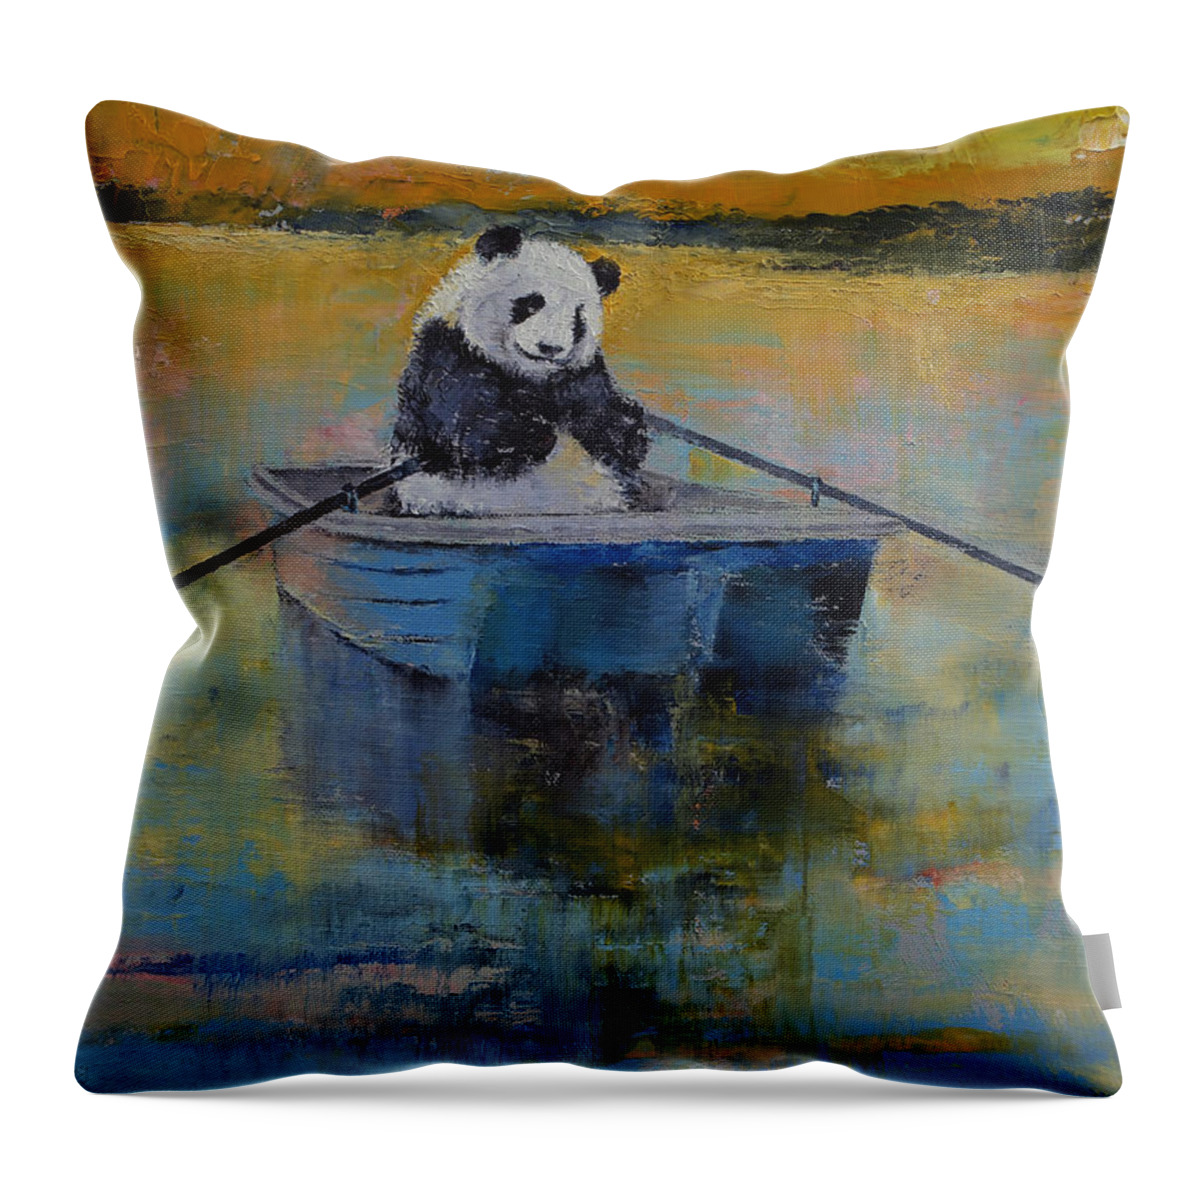 Panda Throw Pillow featuring the painting Panda Reflections #2 by Michael Creese